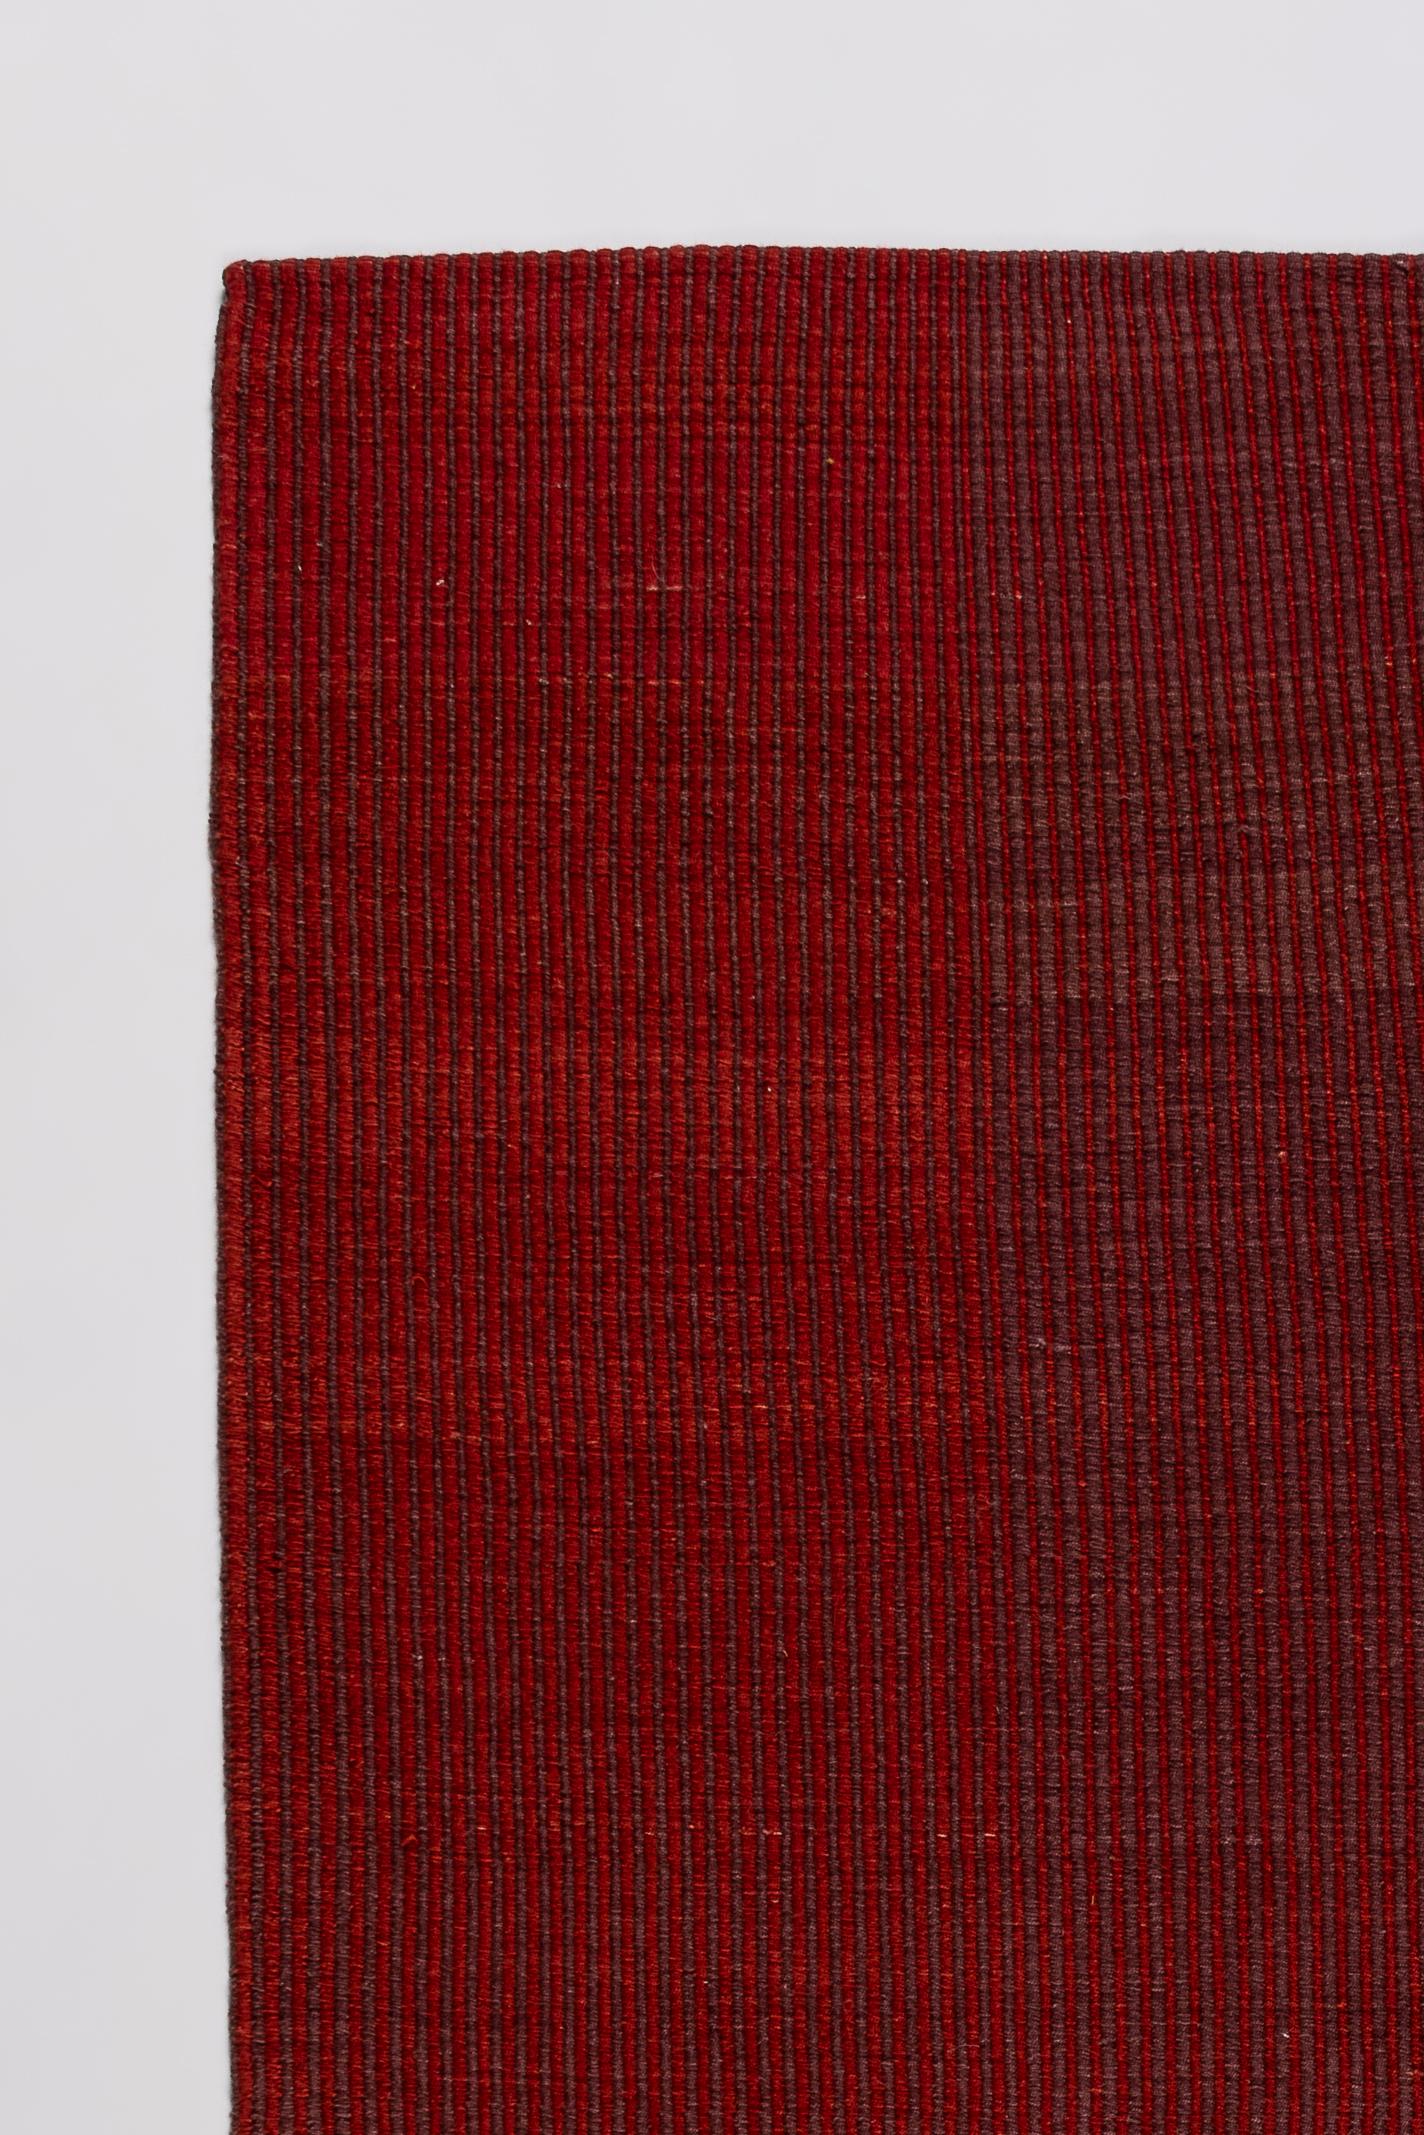 Turkish Haze Editions Contemporary Kilim Area Rug Wool Handwoven in Maroon Red in Stock